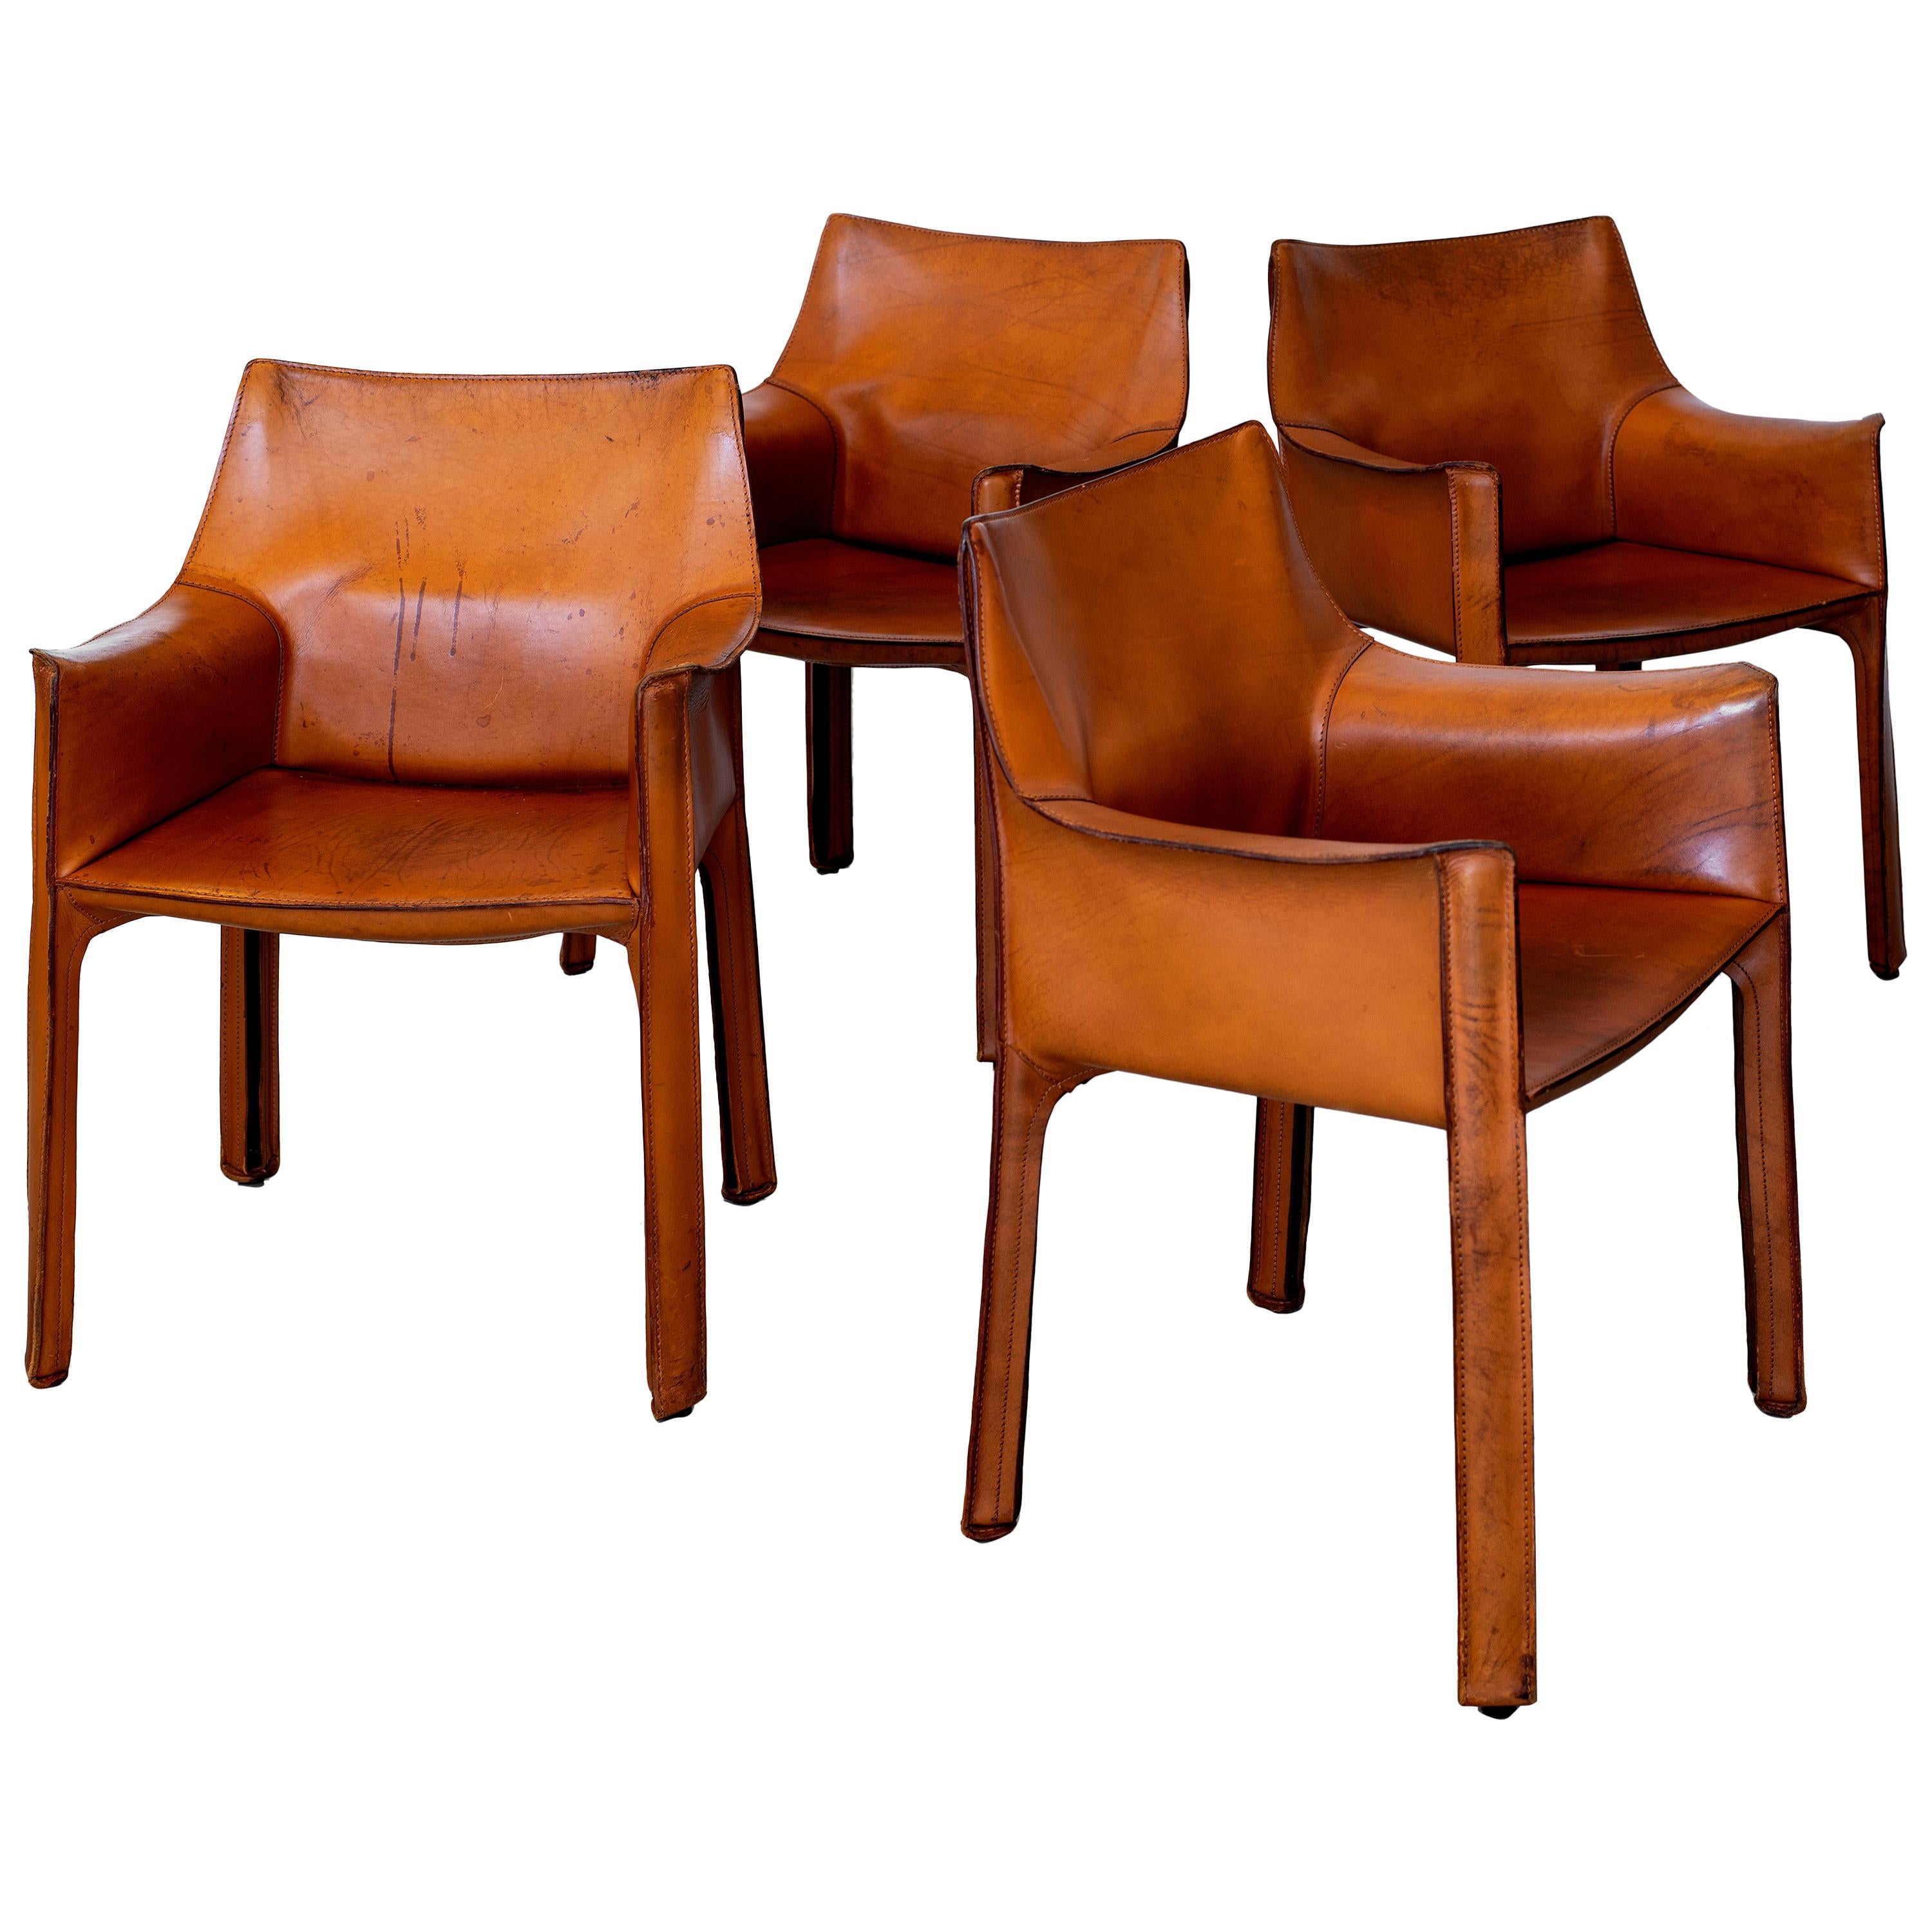 Set of 4 Bellini "Cab" Chairs